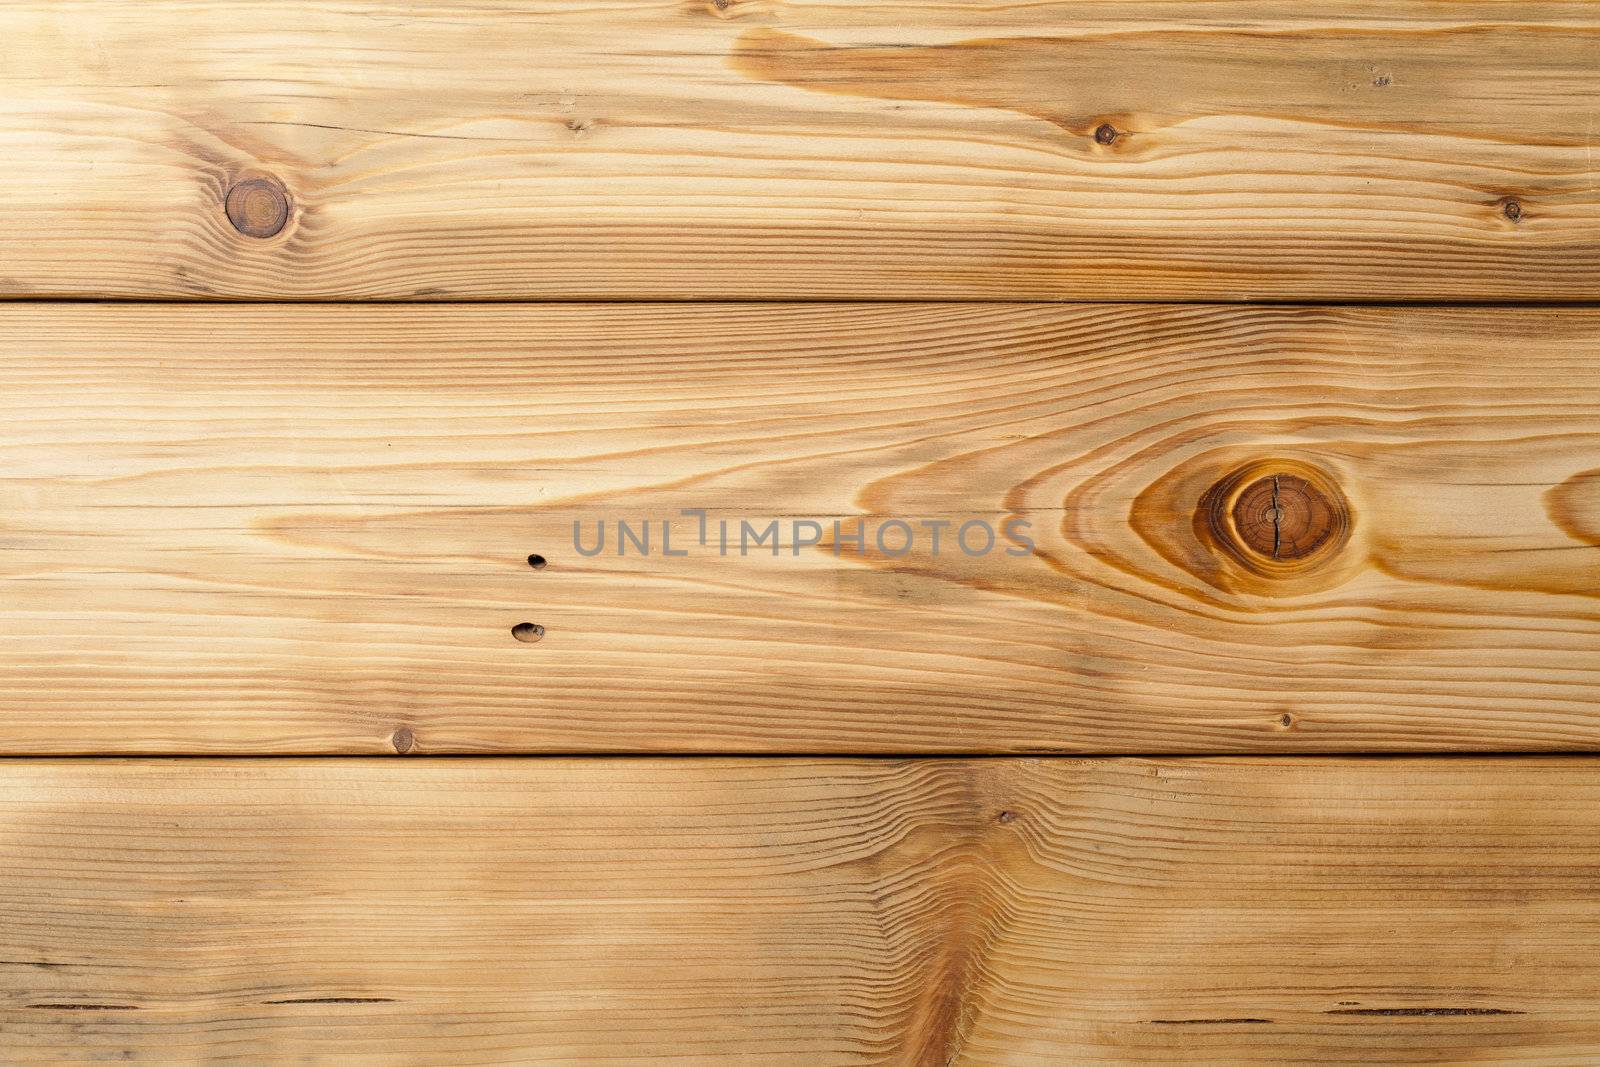 Old wood planks texture for background, table top view